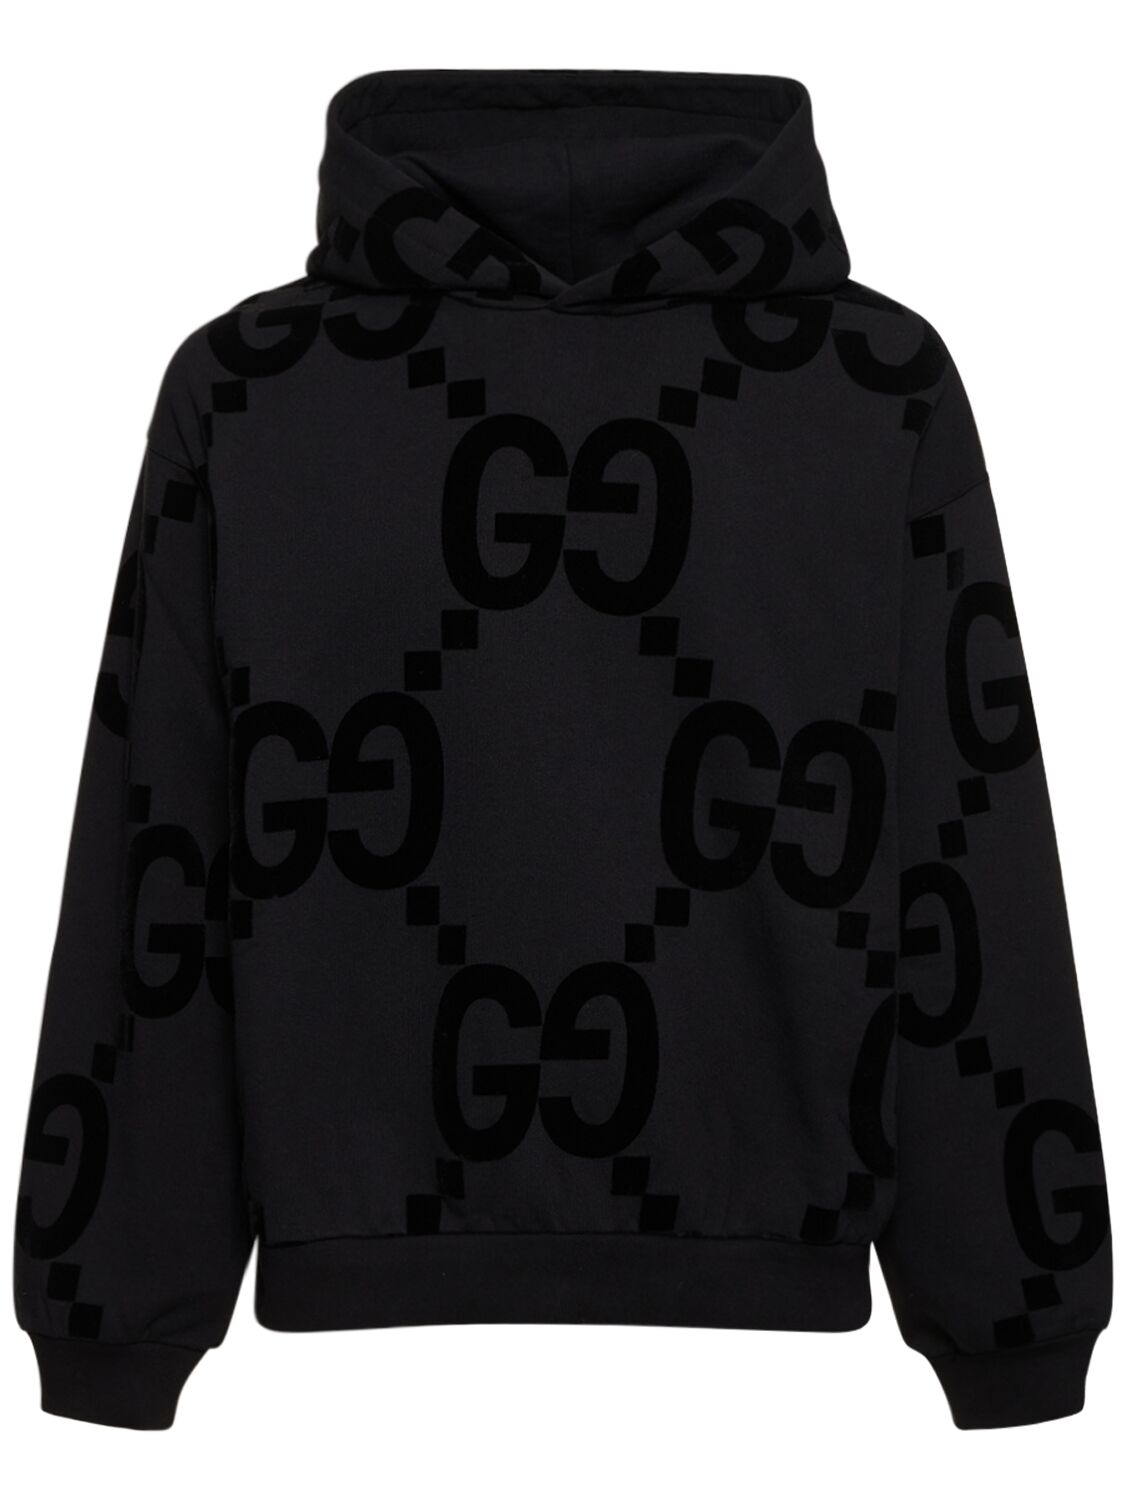 Image of Gg Flocked Tcotton Jersey Hoodie